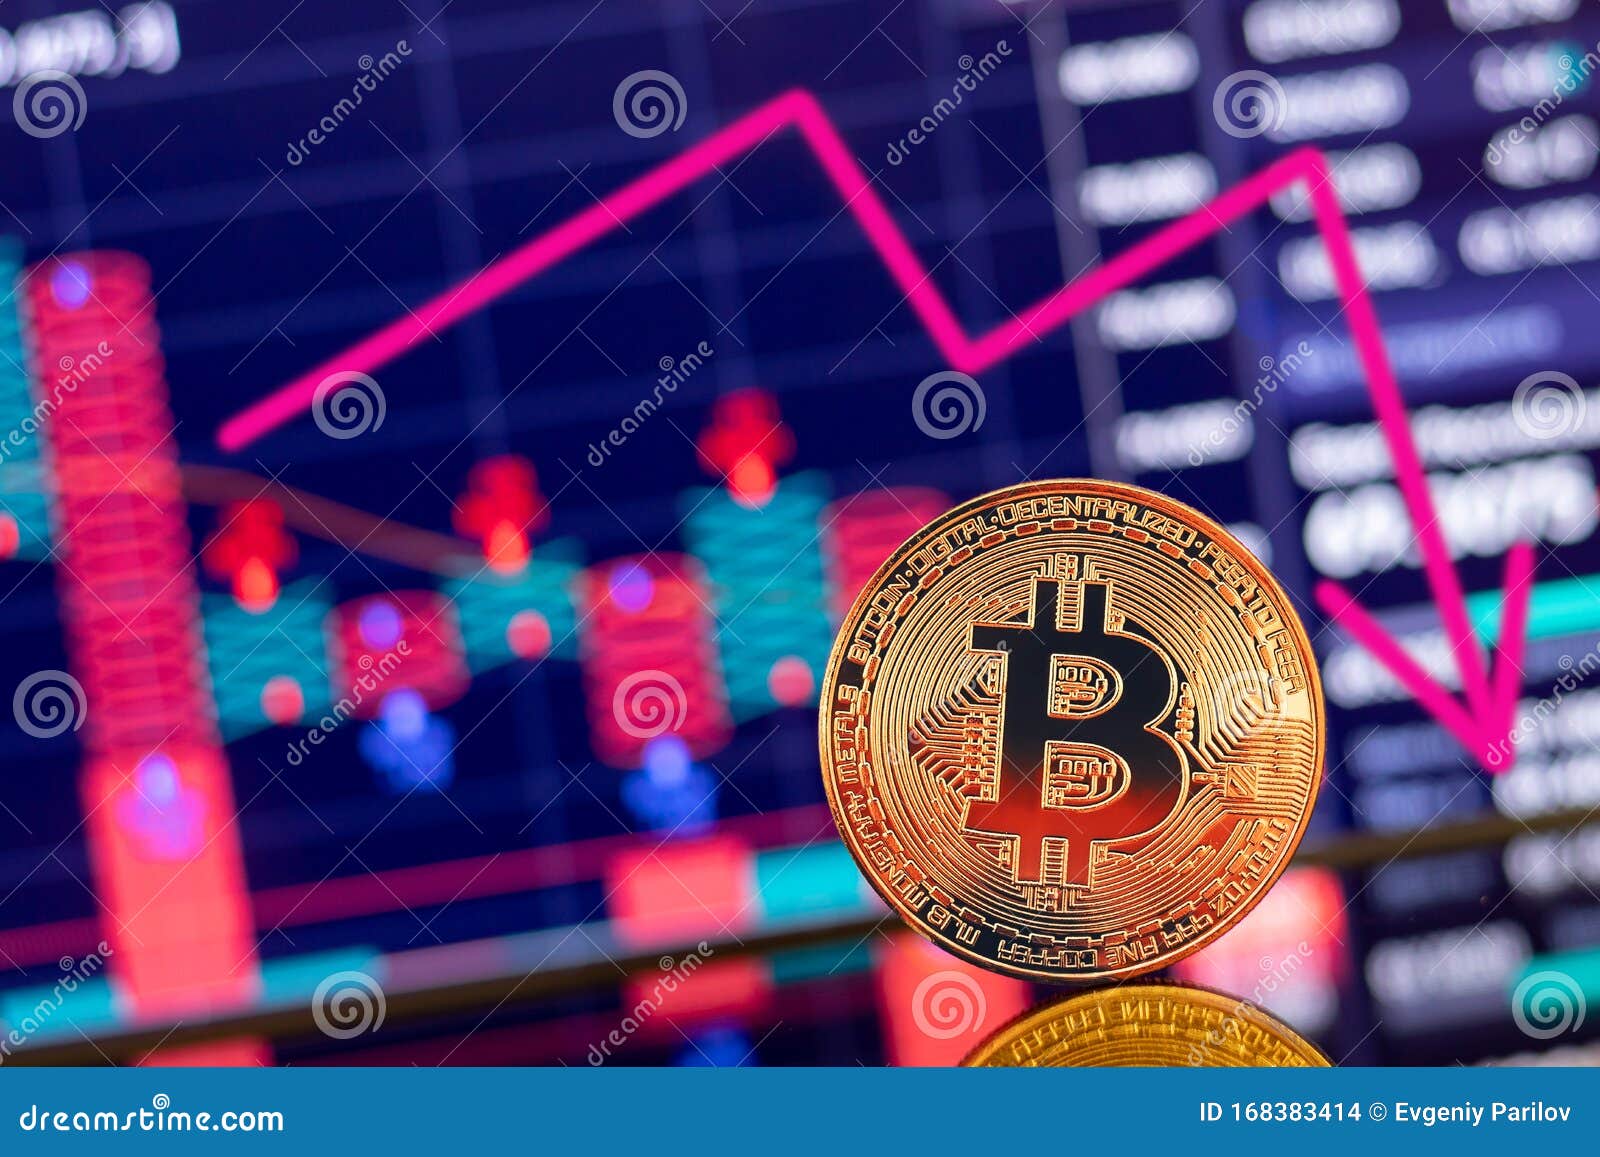 crypto currency brokerage